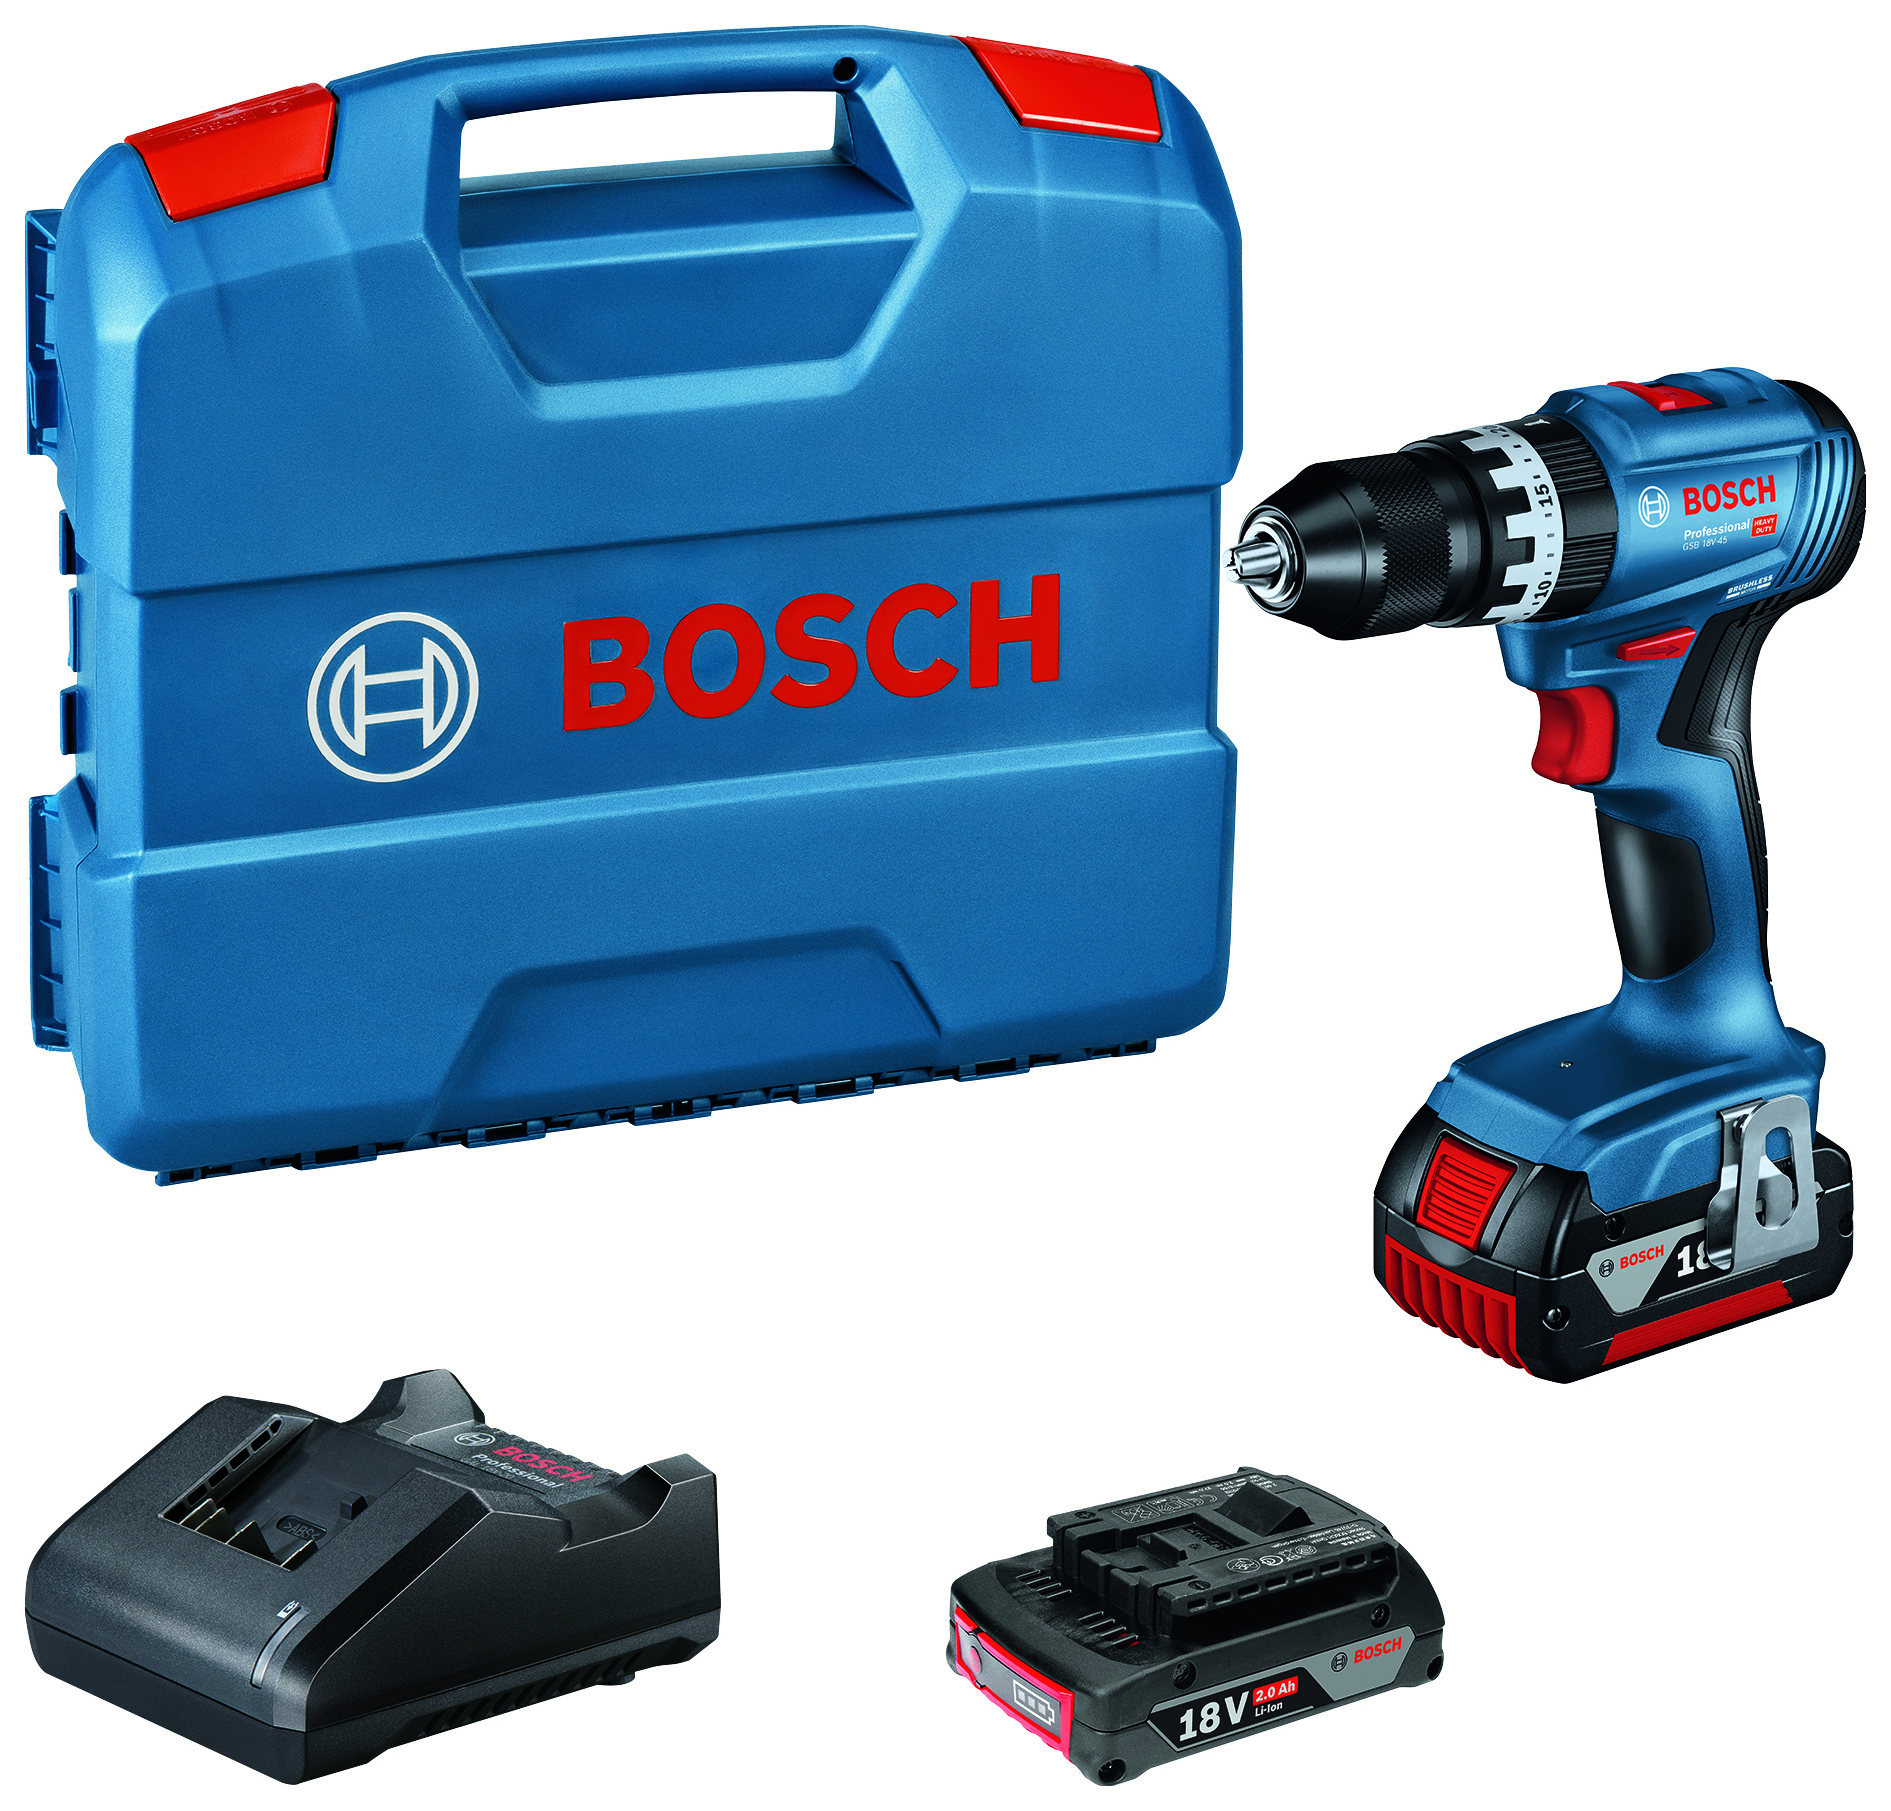 Image of Bosch Professional Gsb 18V-45 2 x 2.0Ah 18V Brushless Cordless Combi Drill, in Lightweight